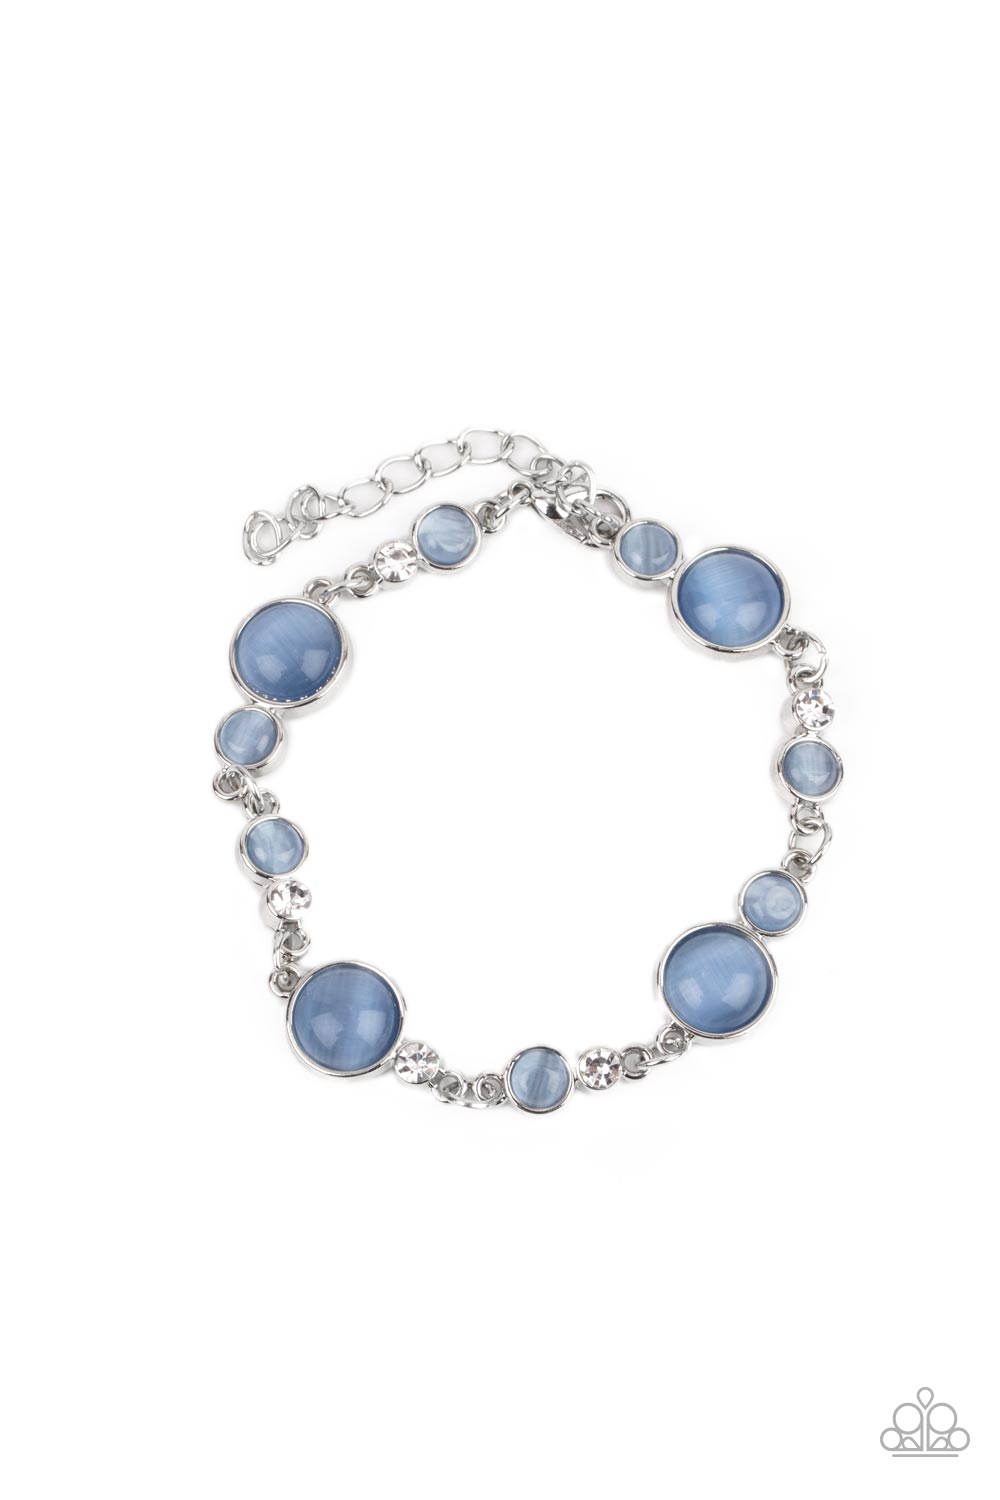 Queen Camillas blue bracelet shes worn since Queens death has touching  meaning  Expresscouk